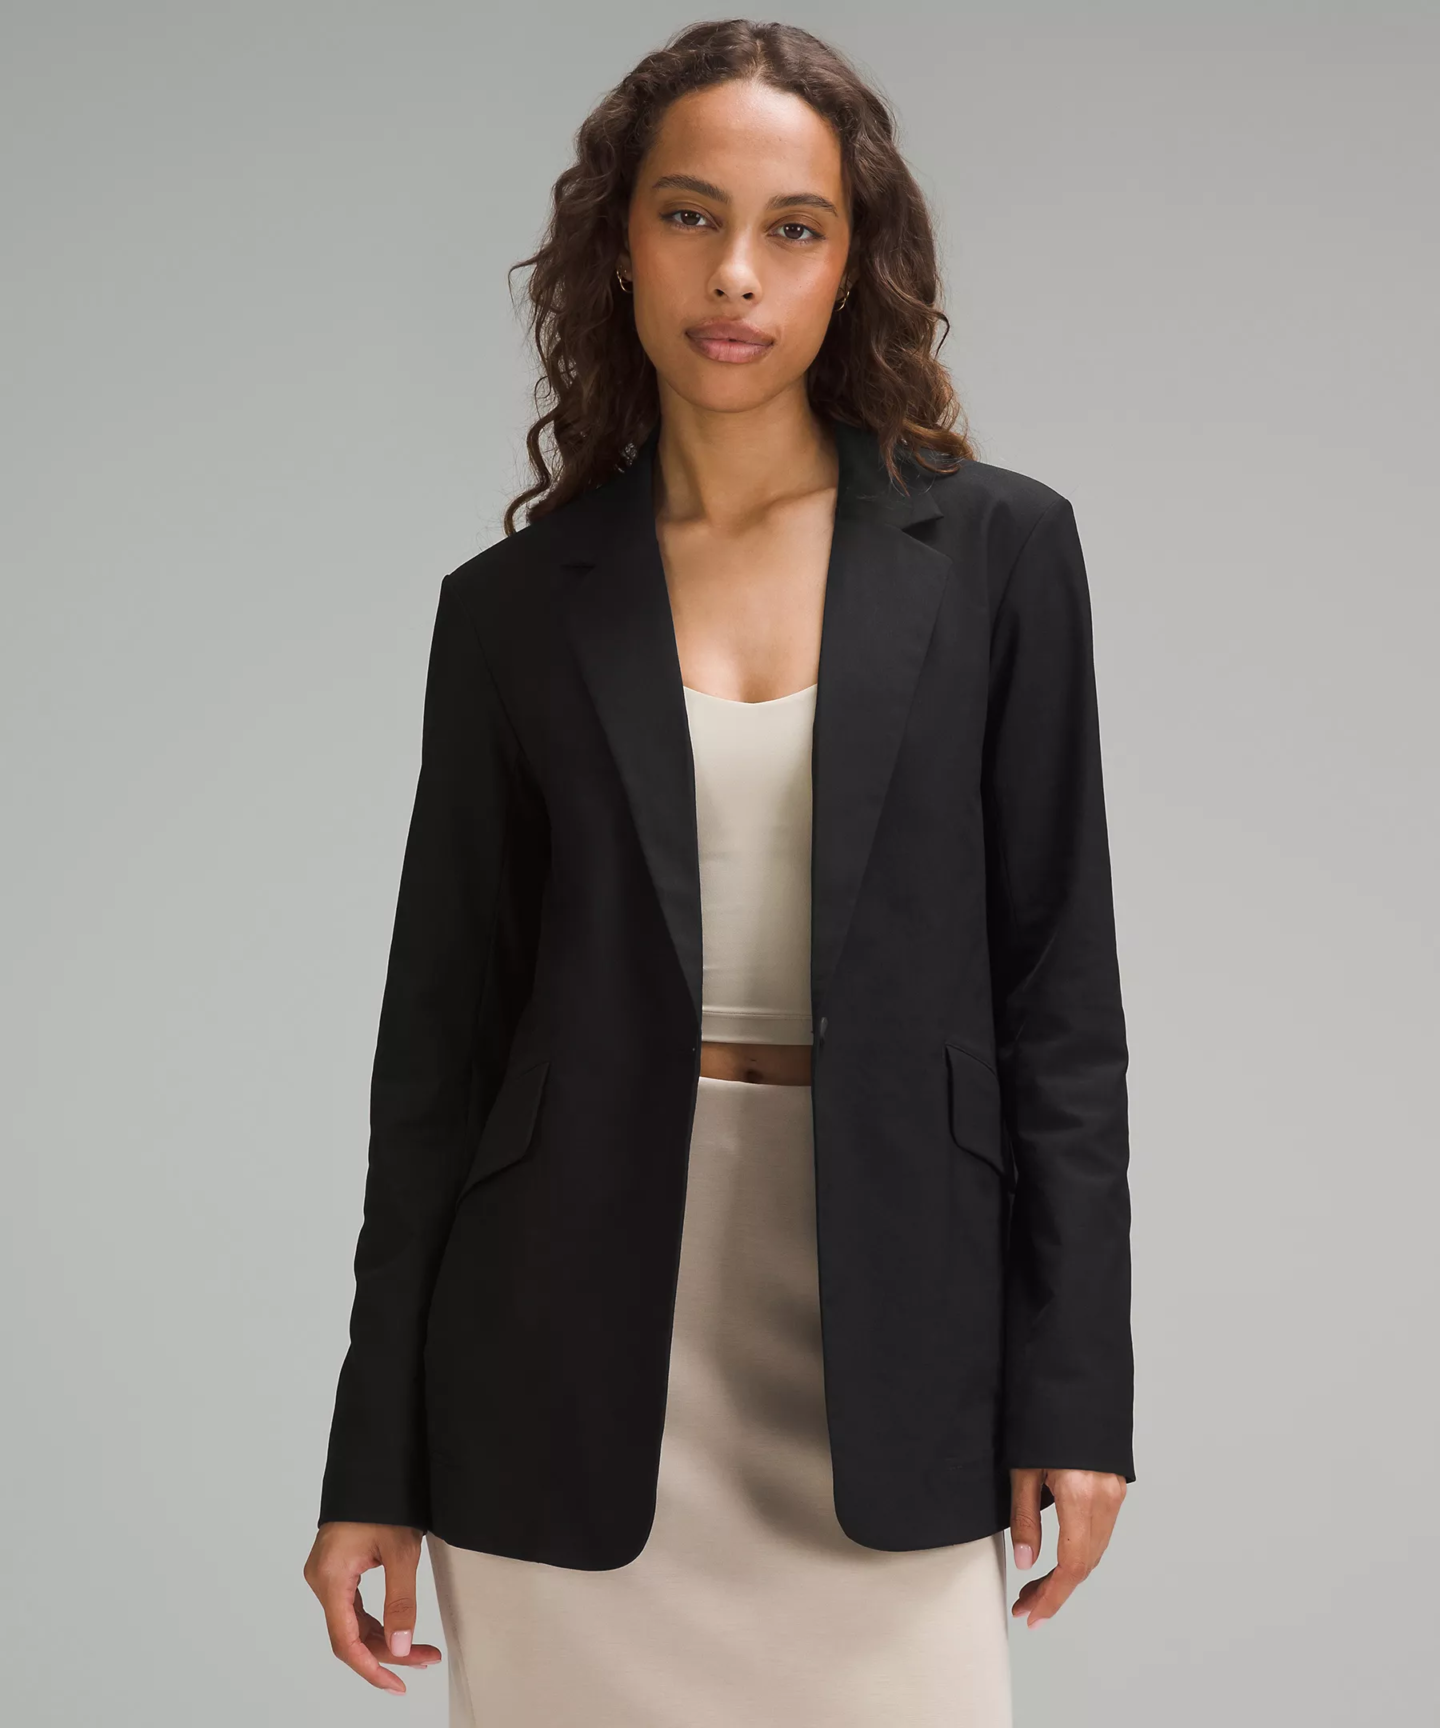 lululemon - Relaxed-Fit Smooth Twill Blazer